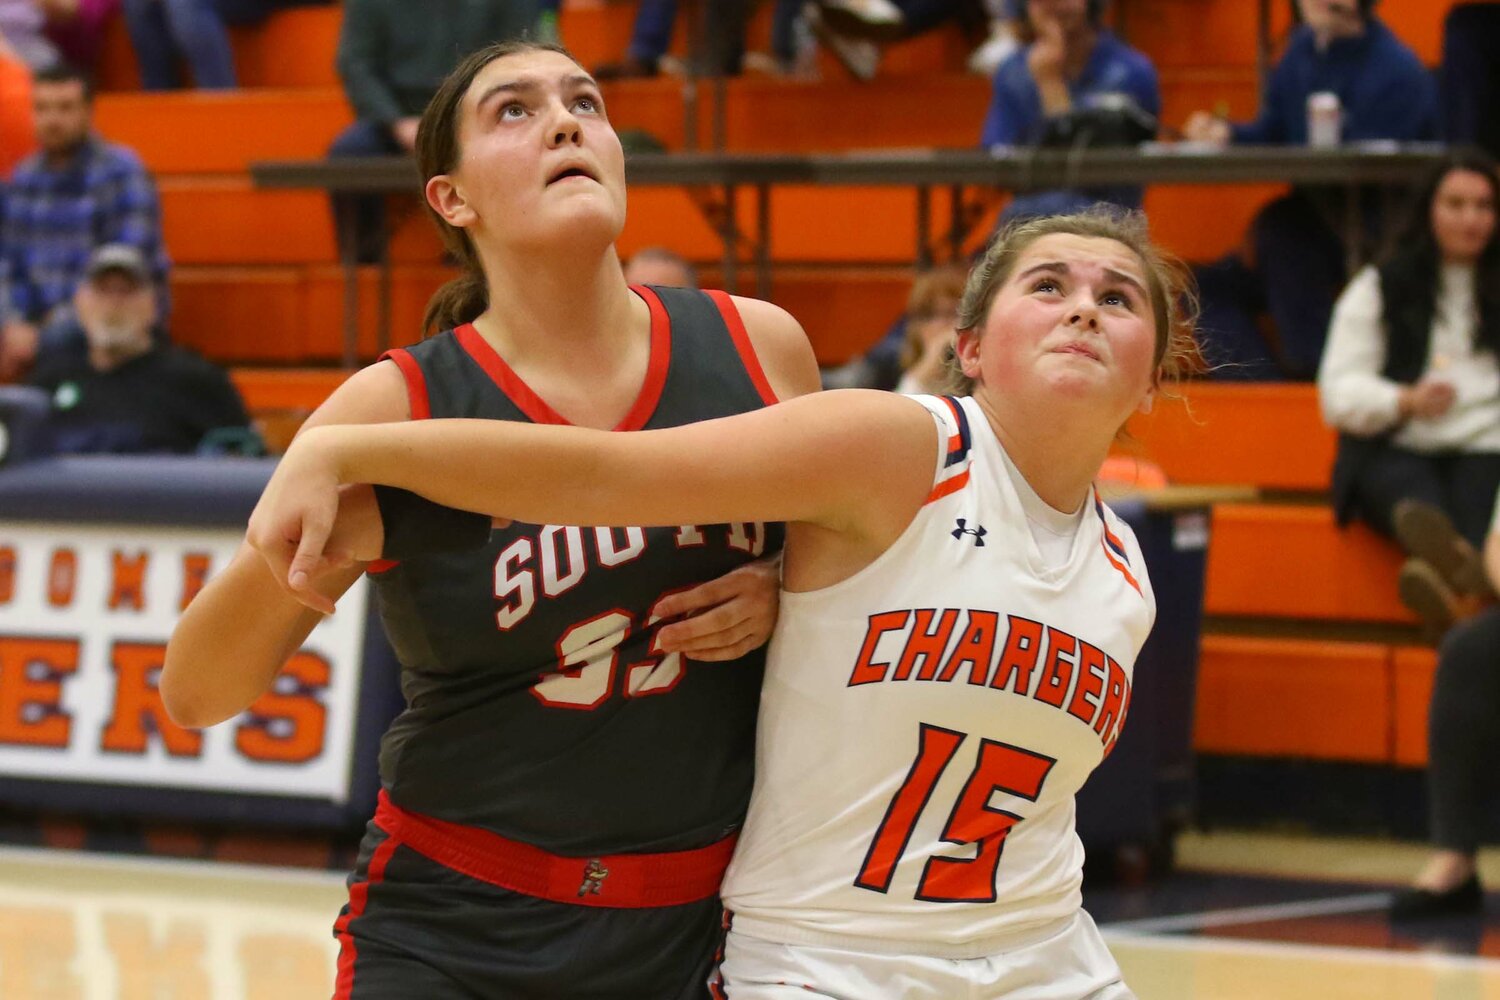 Layla Gomez of Southmont - battling for rebounding position with Macee NOrman of North Montgomery